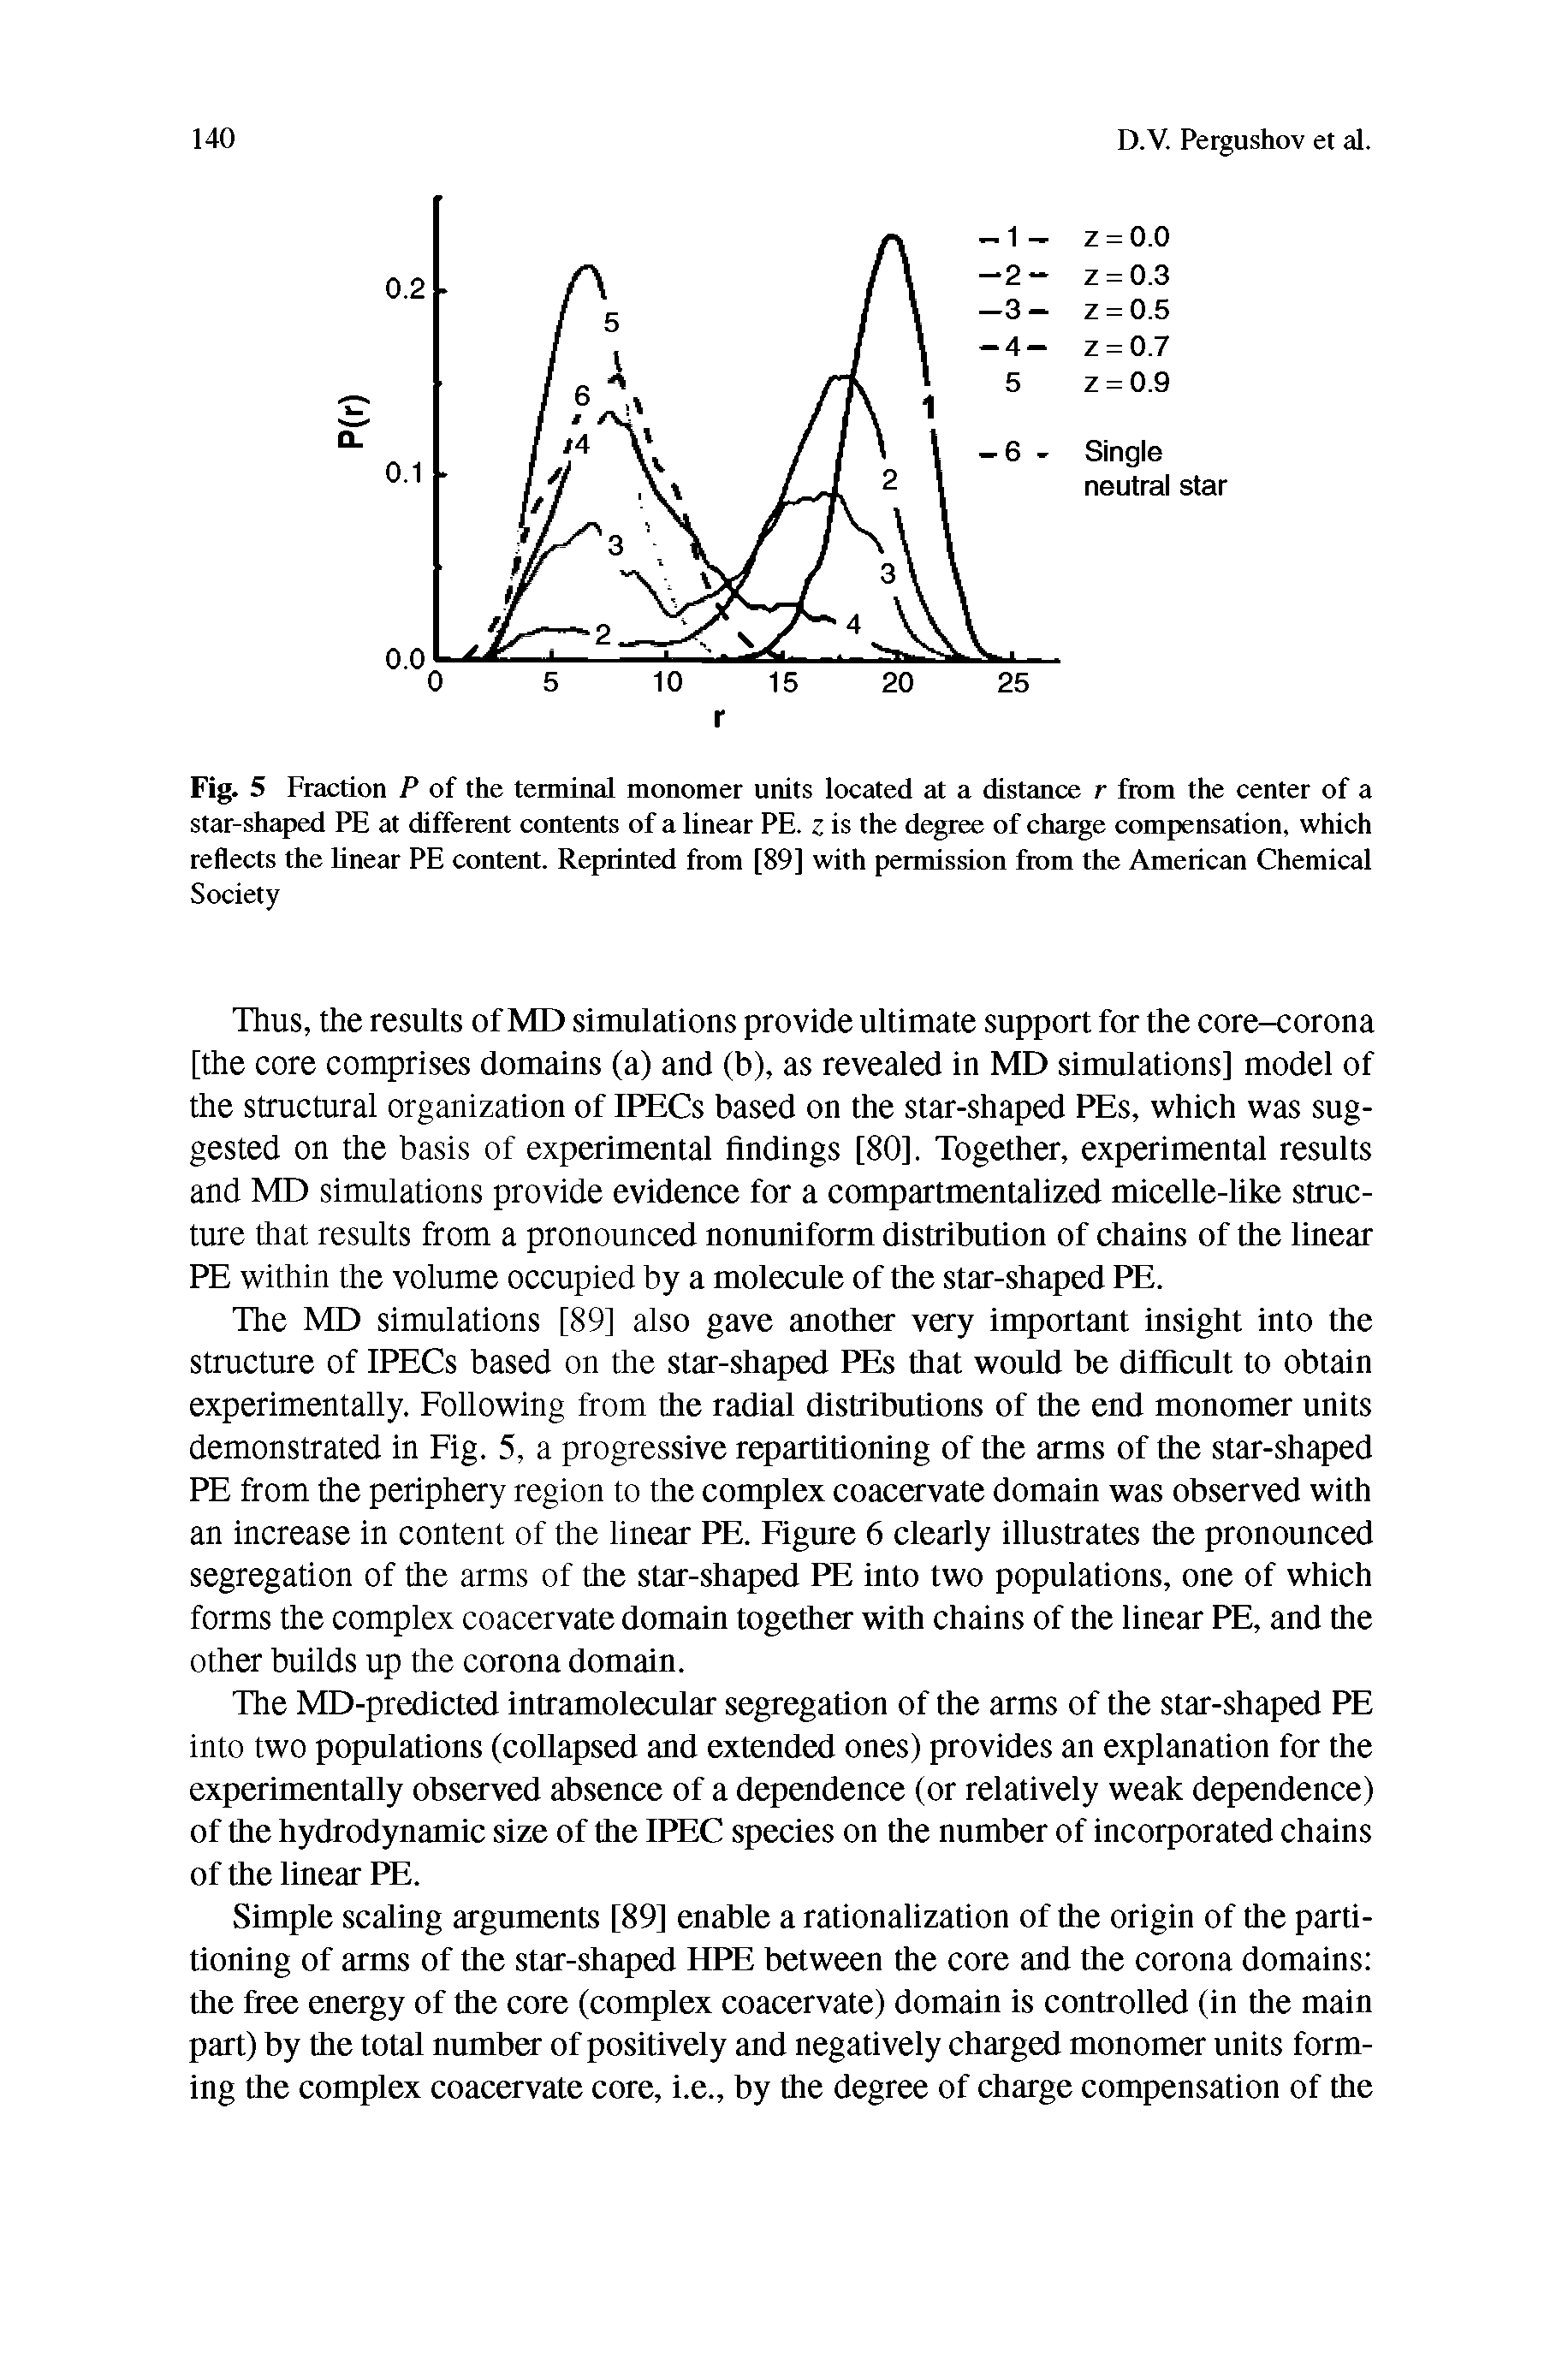 Fig. 5 Fraction P of the terminal monomer units located at a distance r from the center of a star-shaped PE at different contents of a linear PE. z is the degree of charge compensation, which reflects the linear PE content. Reprinted from [89] with permission from the American Chemical Society...